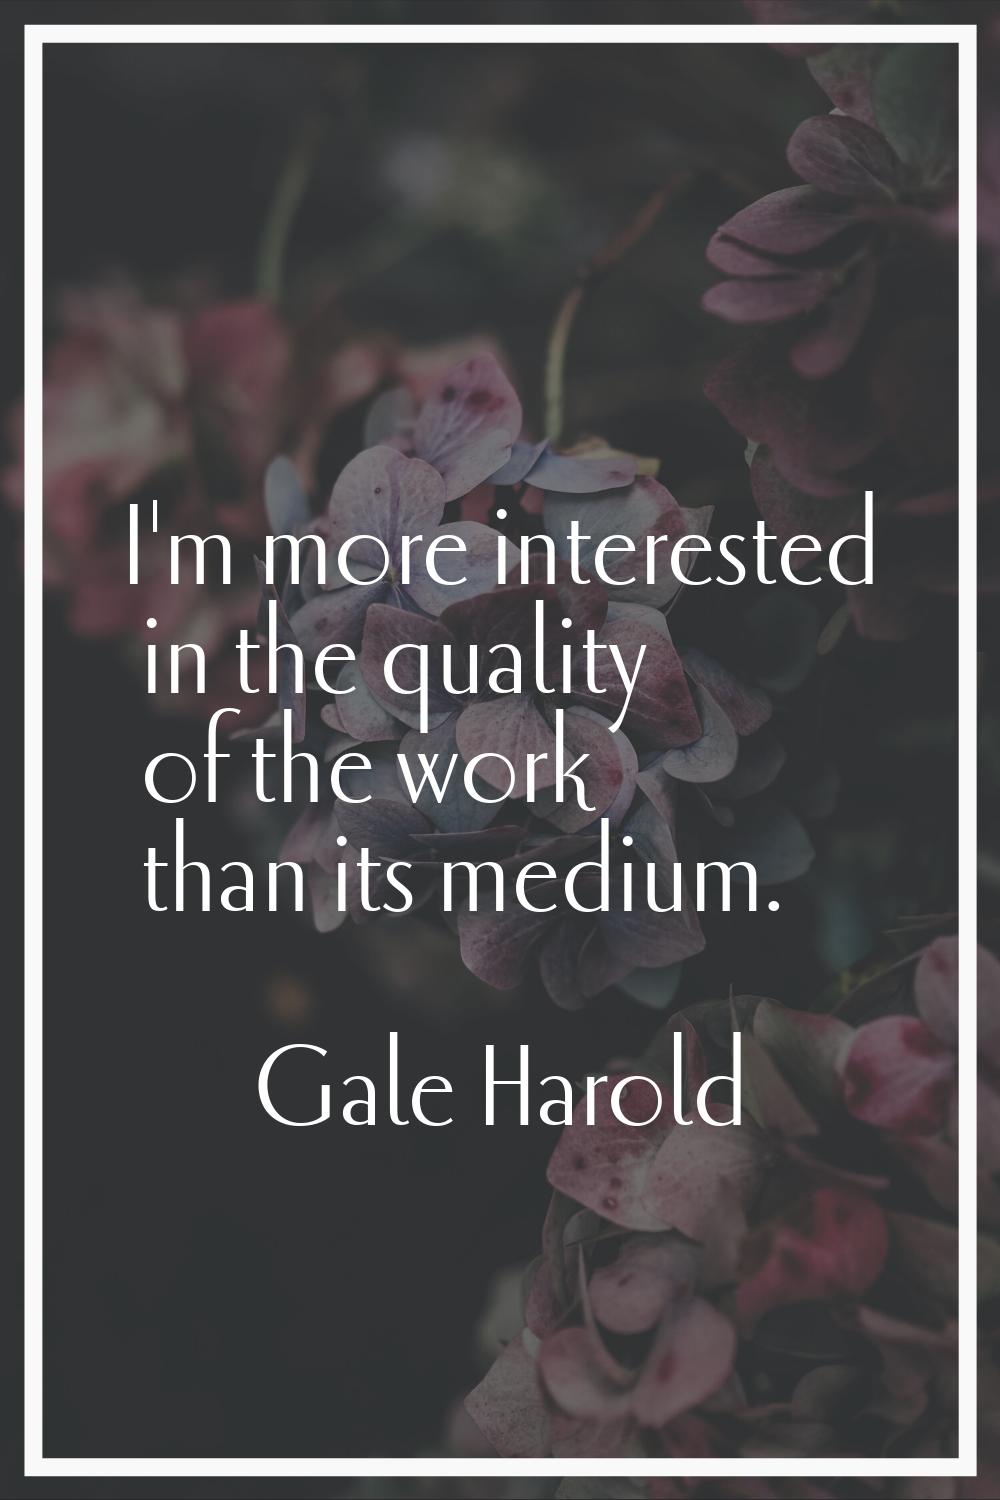 I'm more interested in the quality of the work than its medium.